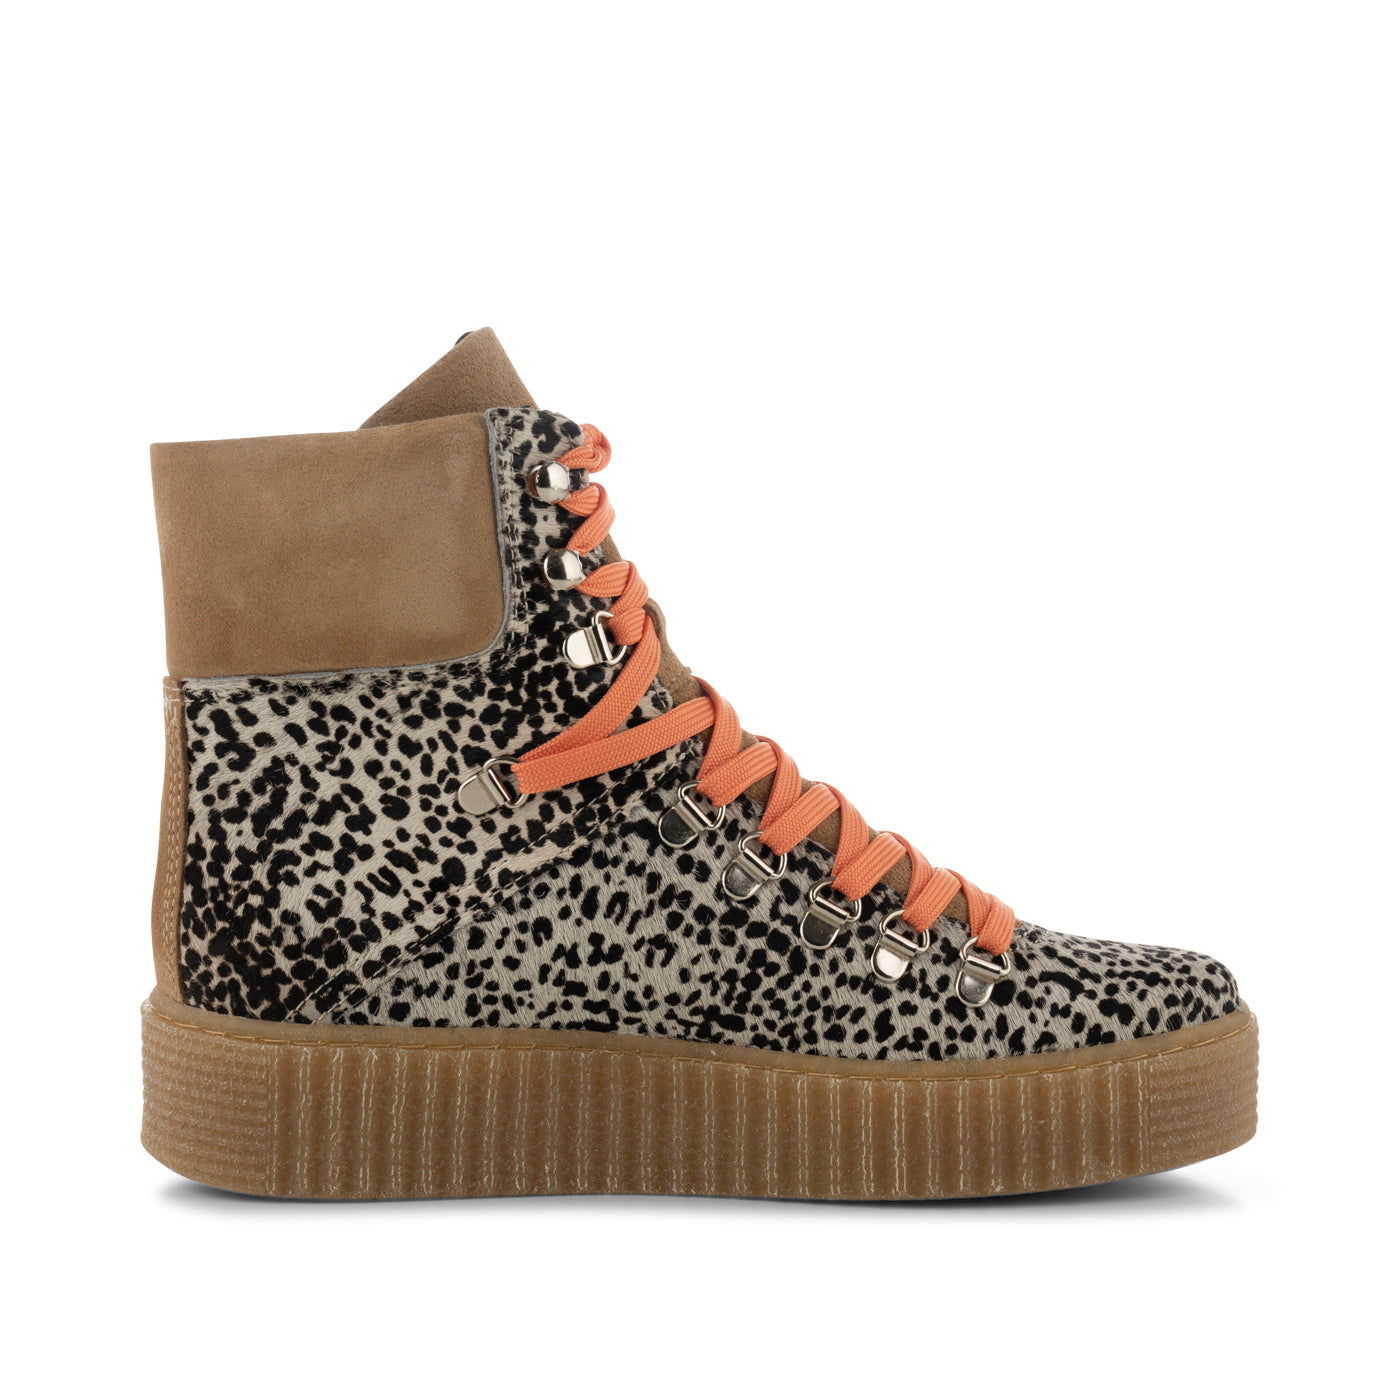 SHOE THE BEAR WOMENS Agda støvle ruskind Boots 127 OFF WHITE